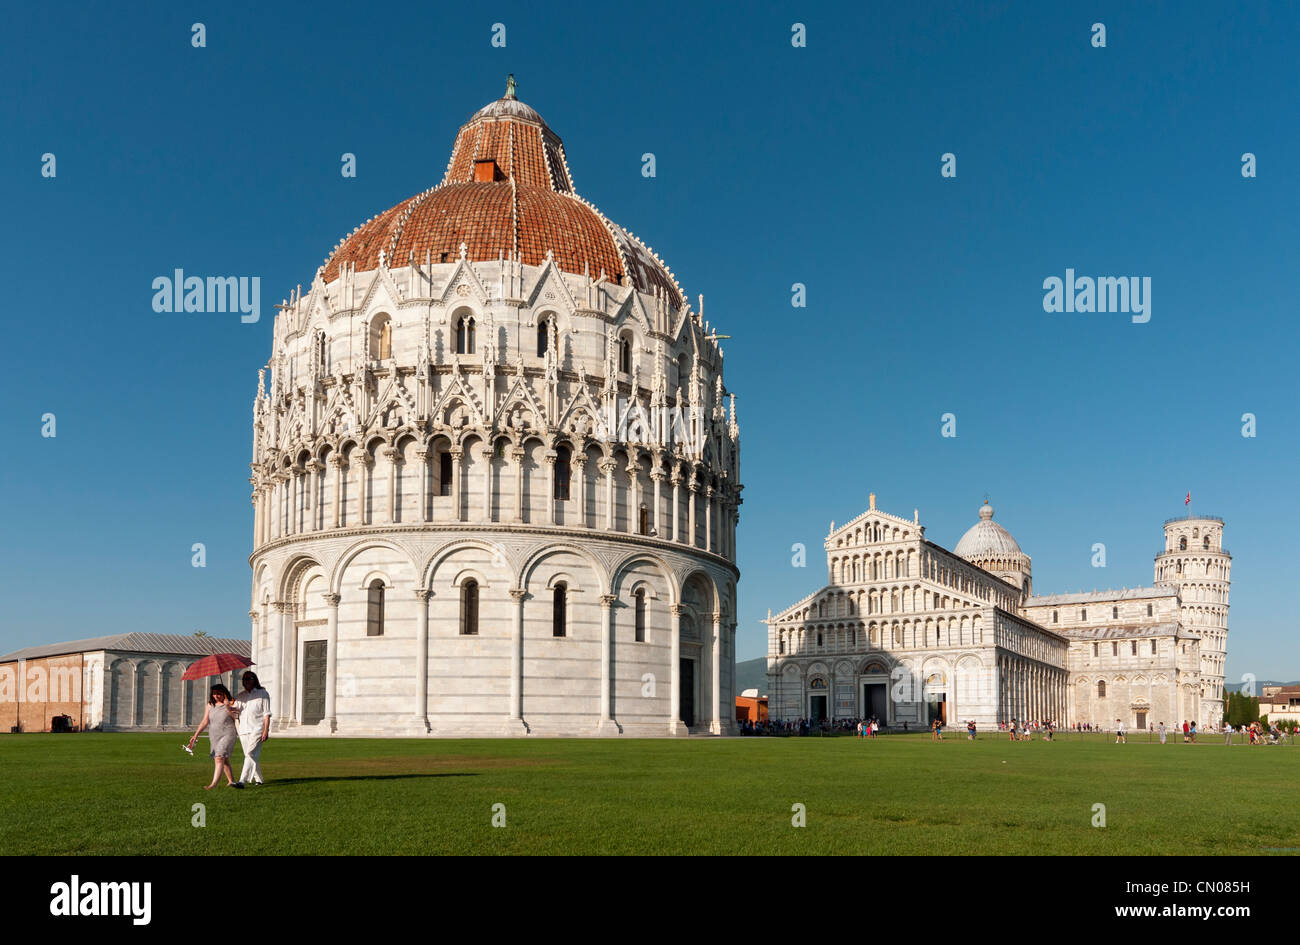 Baptistry of St John (Battistero di San Giovanni) and Duomo (Cathedral) at Piazza dei Miracoli (Square of Miracles), Pisa, Italy Stock Photo